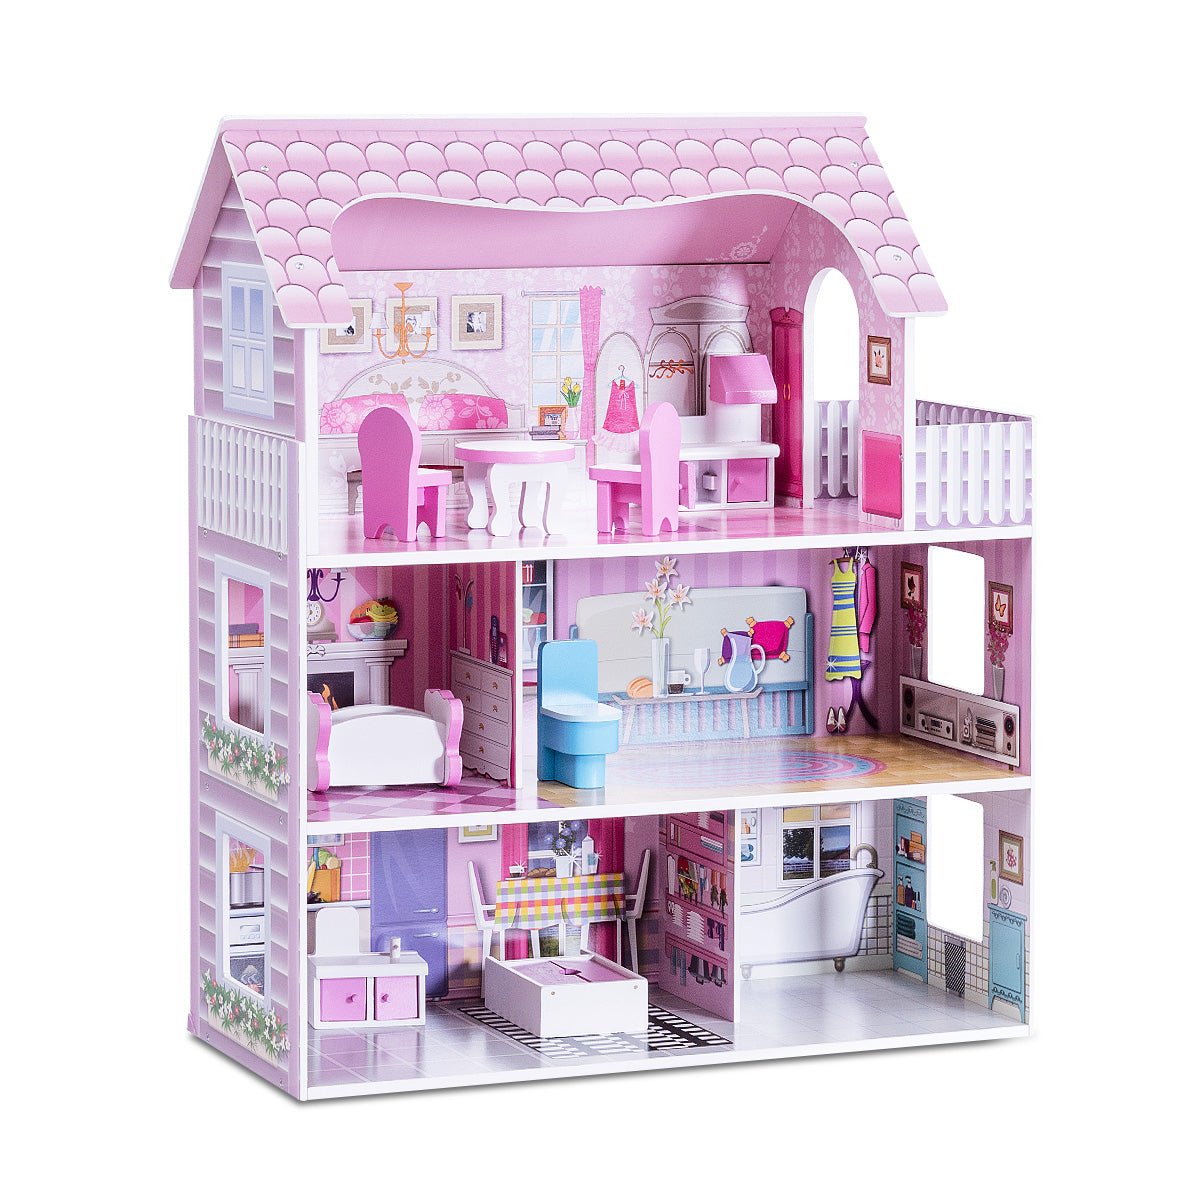 Enhance Playtime with a Complete Dollhouse Set